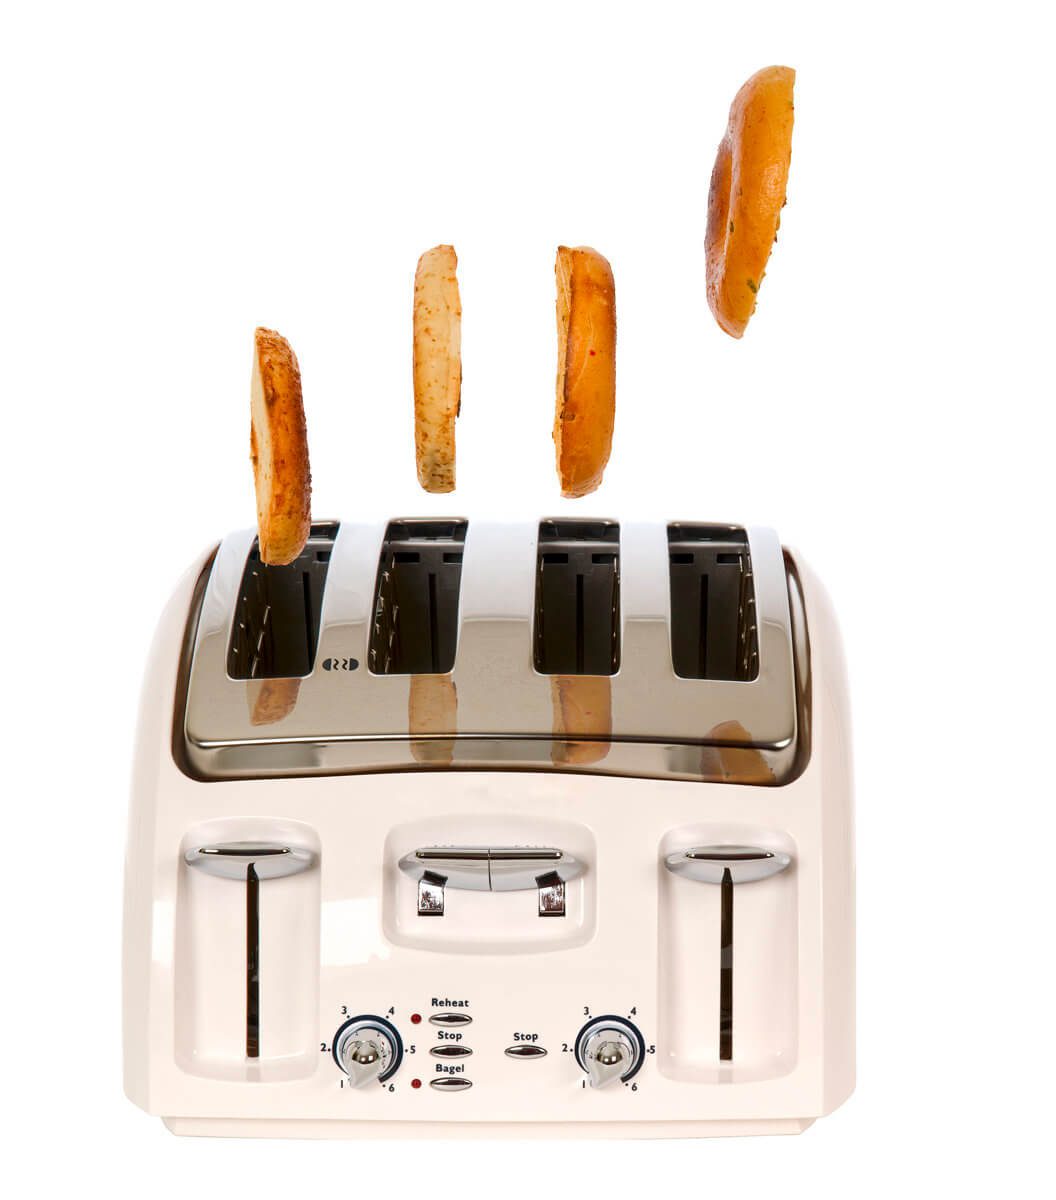 Four bagels popping out of a metallic toaster.